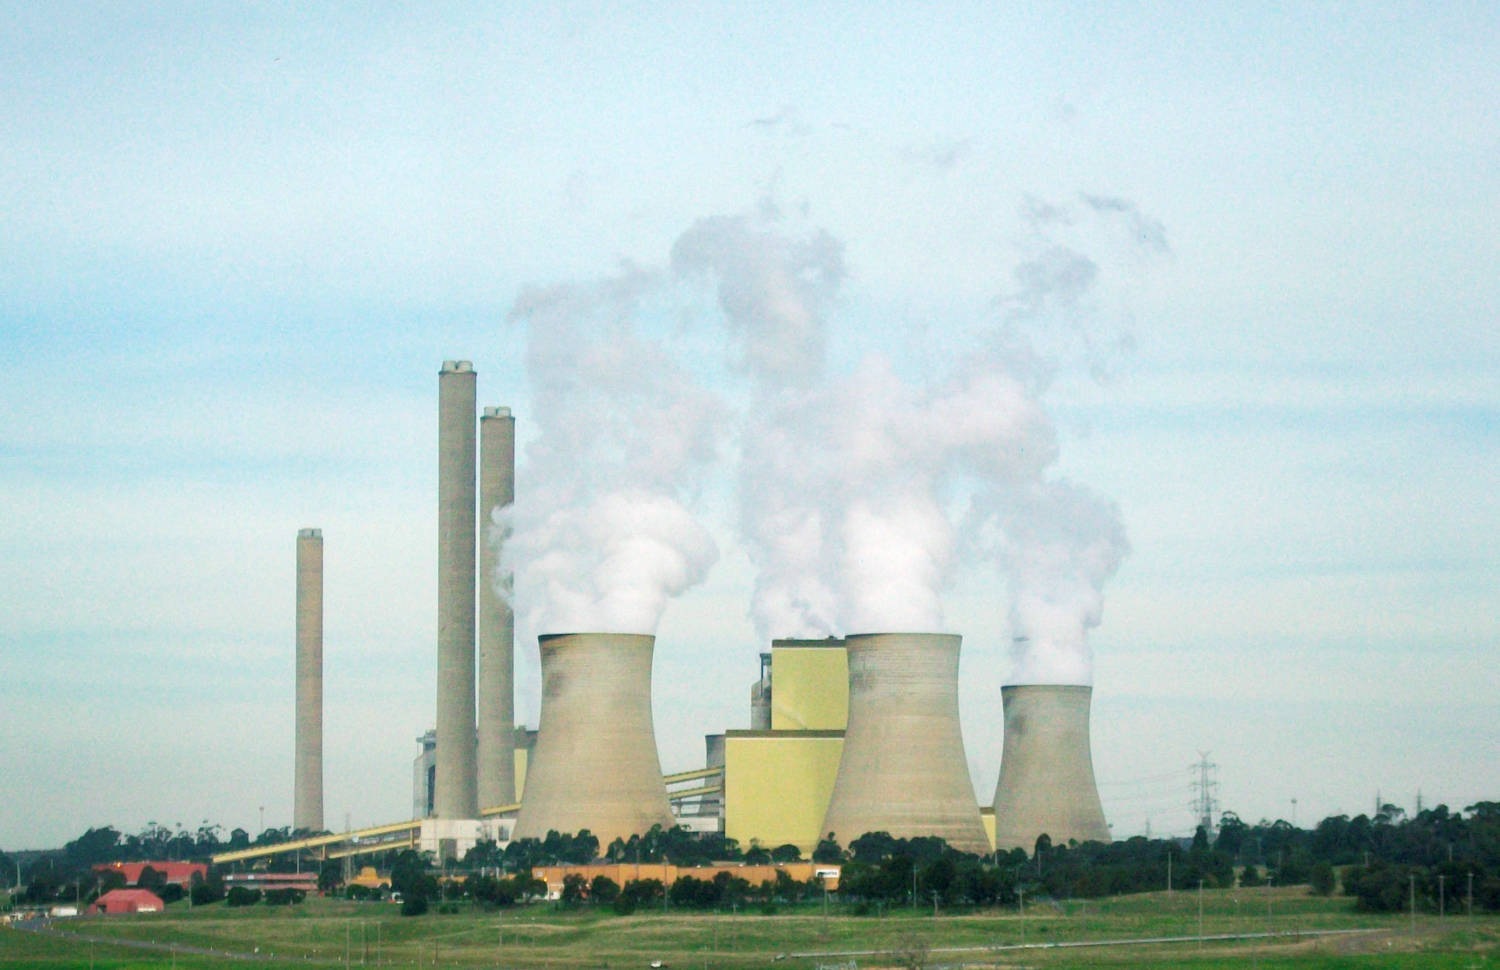 Vapour Rises From Cooling Towers At The Loy Yang Coal Fired Power Station